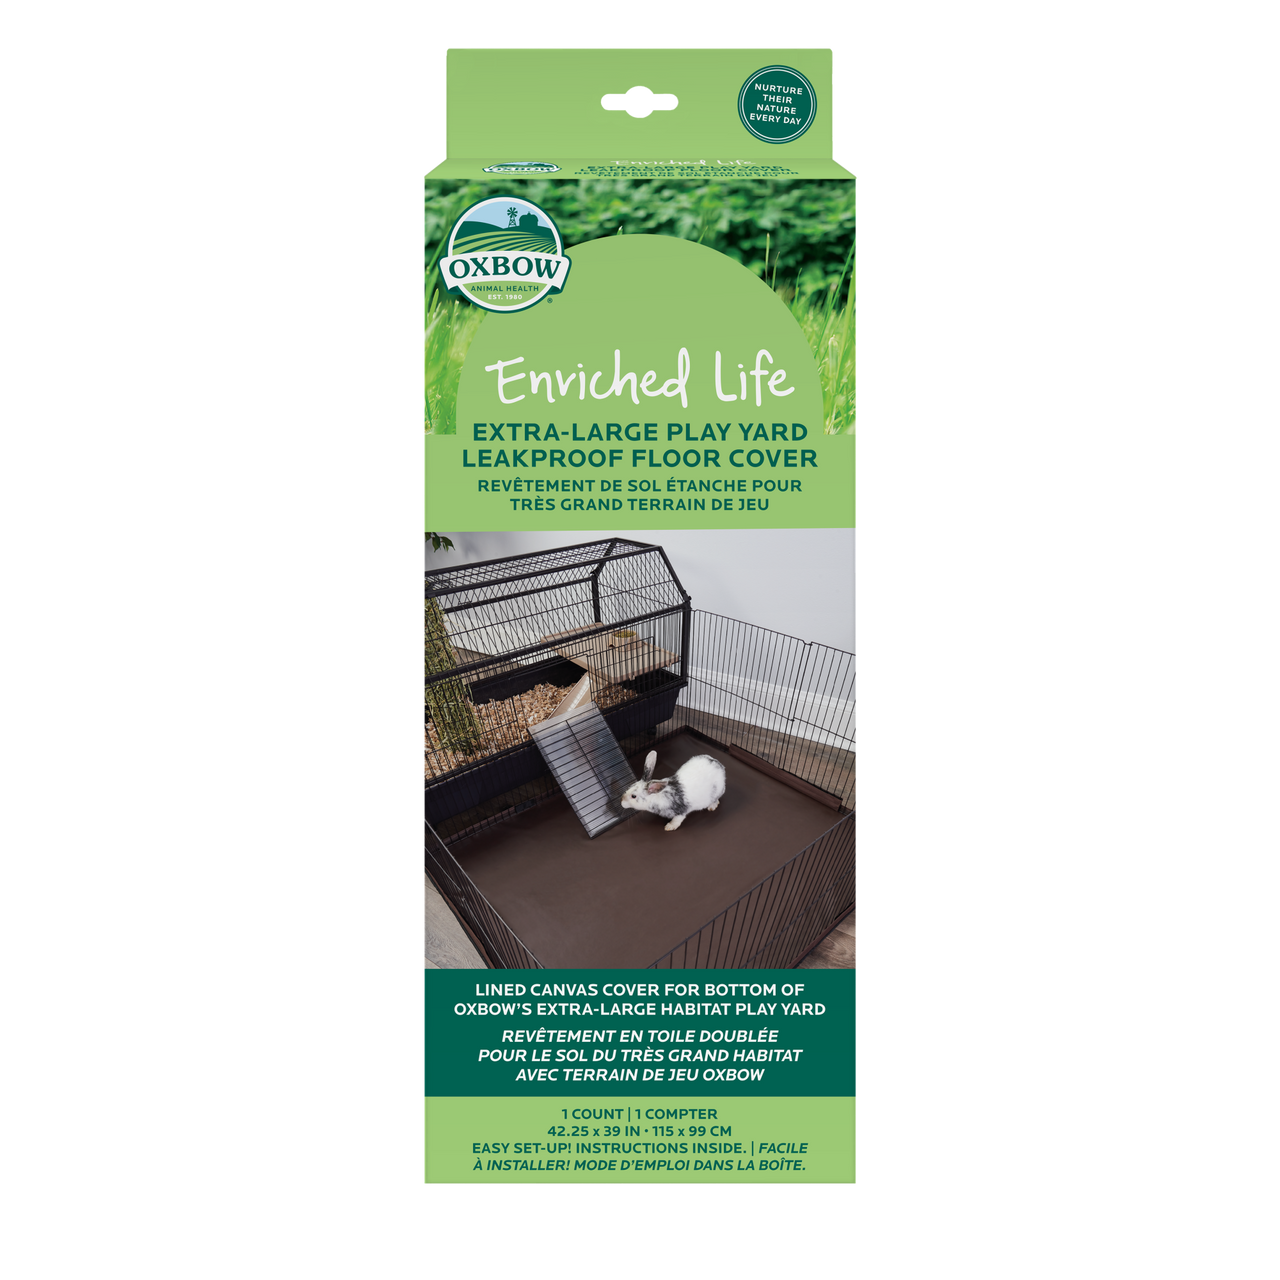 Oxbow Animal Health Enriched Life Leakproof Play Yard Floor Cover XL